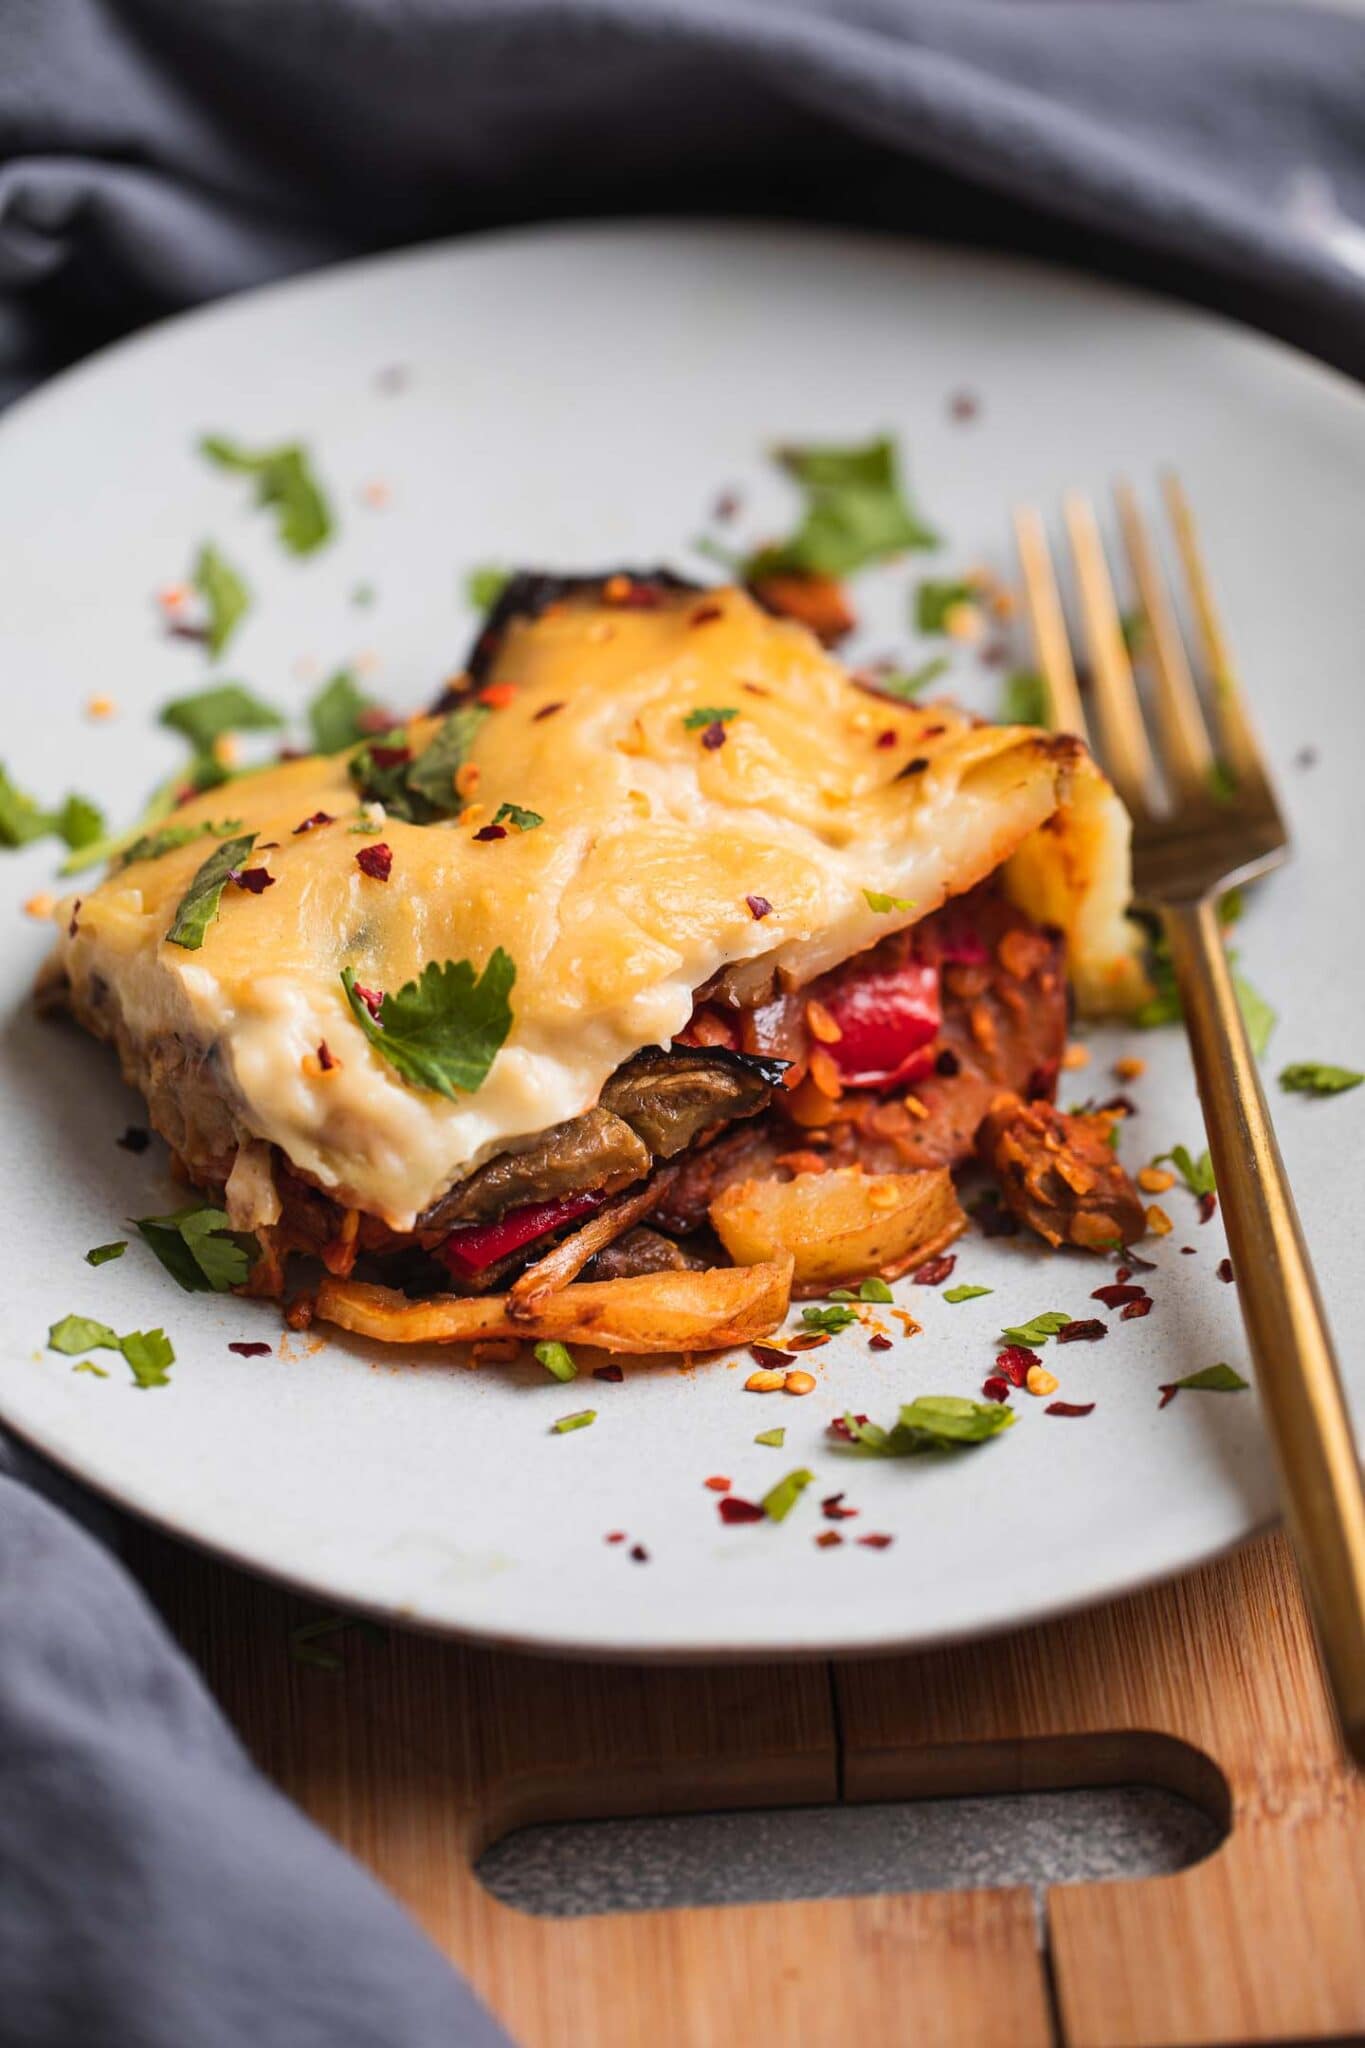 Vegan Moussaka With Lentils | Earth of Maria